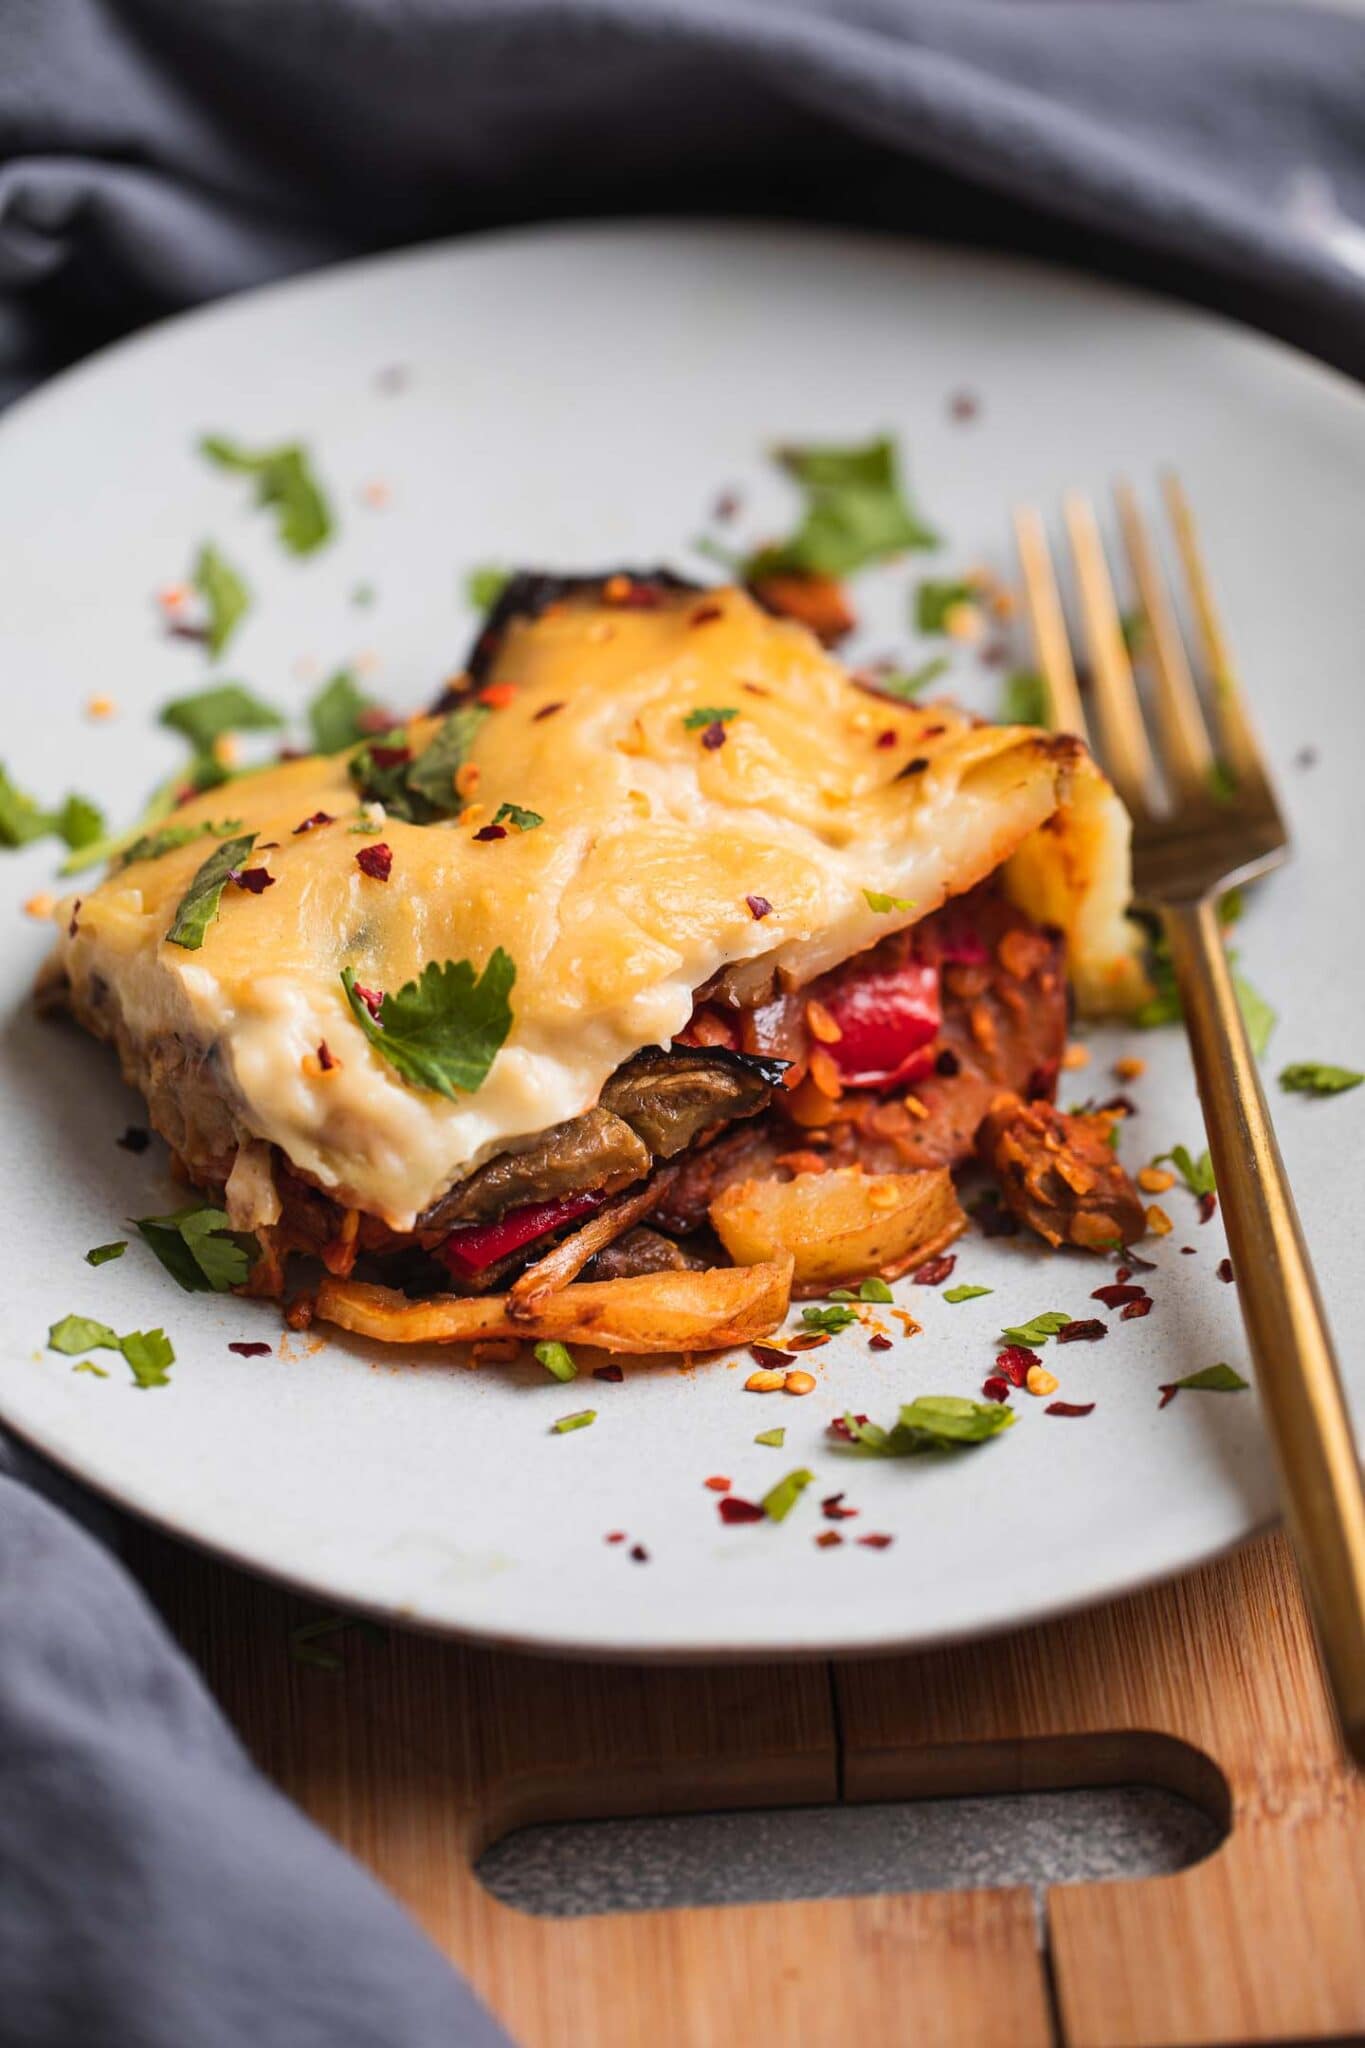 Vegan Moussaka With Lentils | Earth of Maria